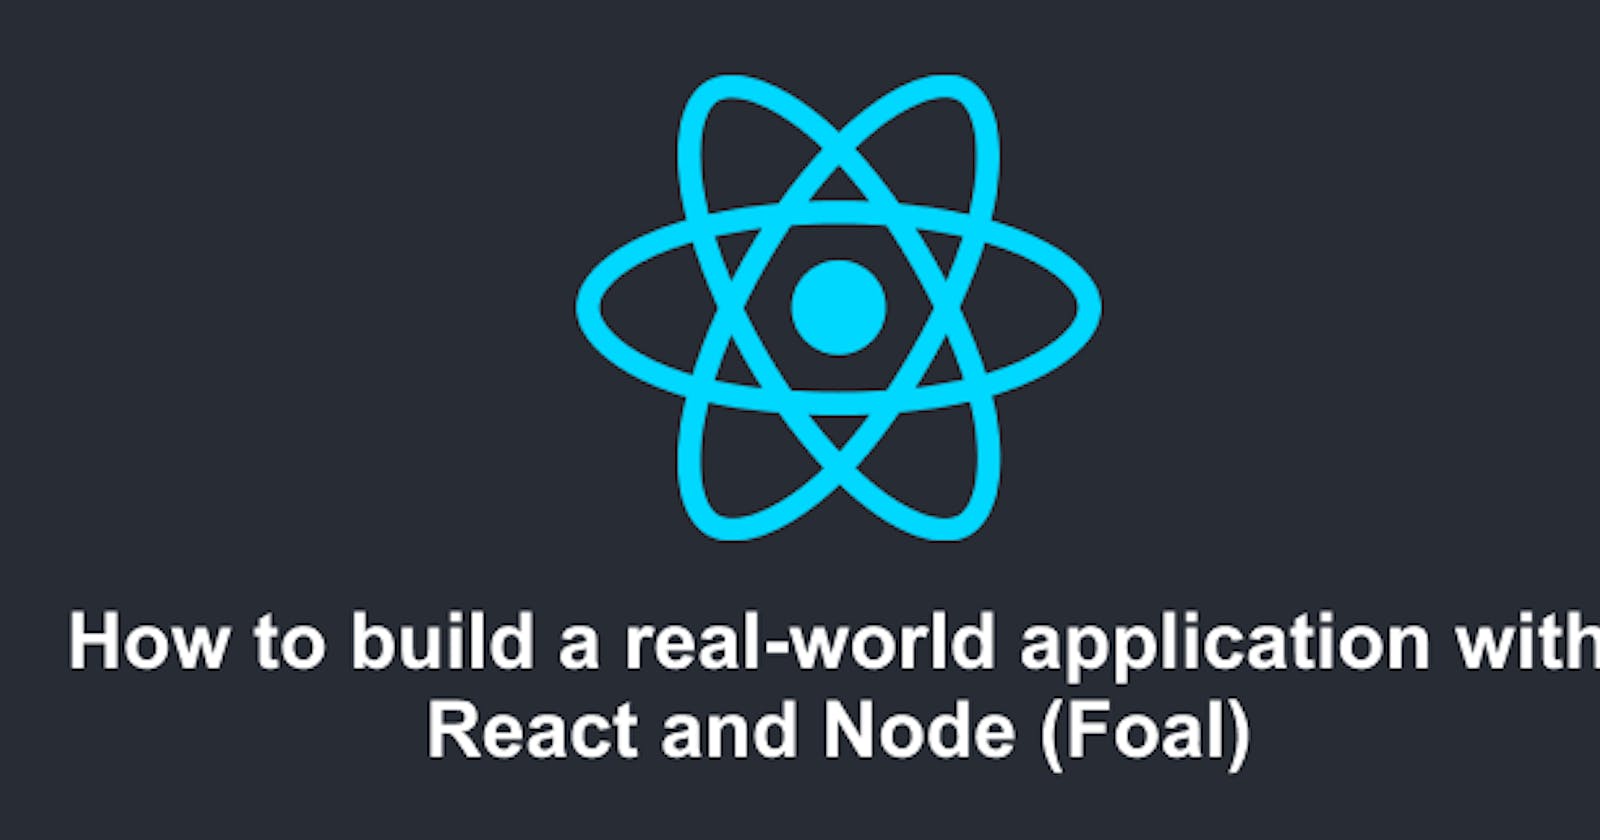 How to build a real-world application with React and Node (Foal)